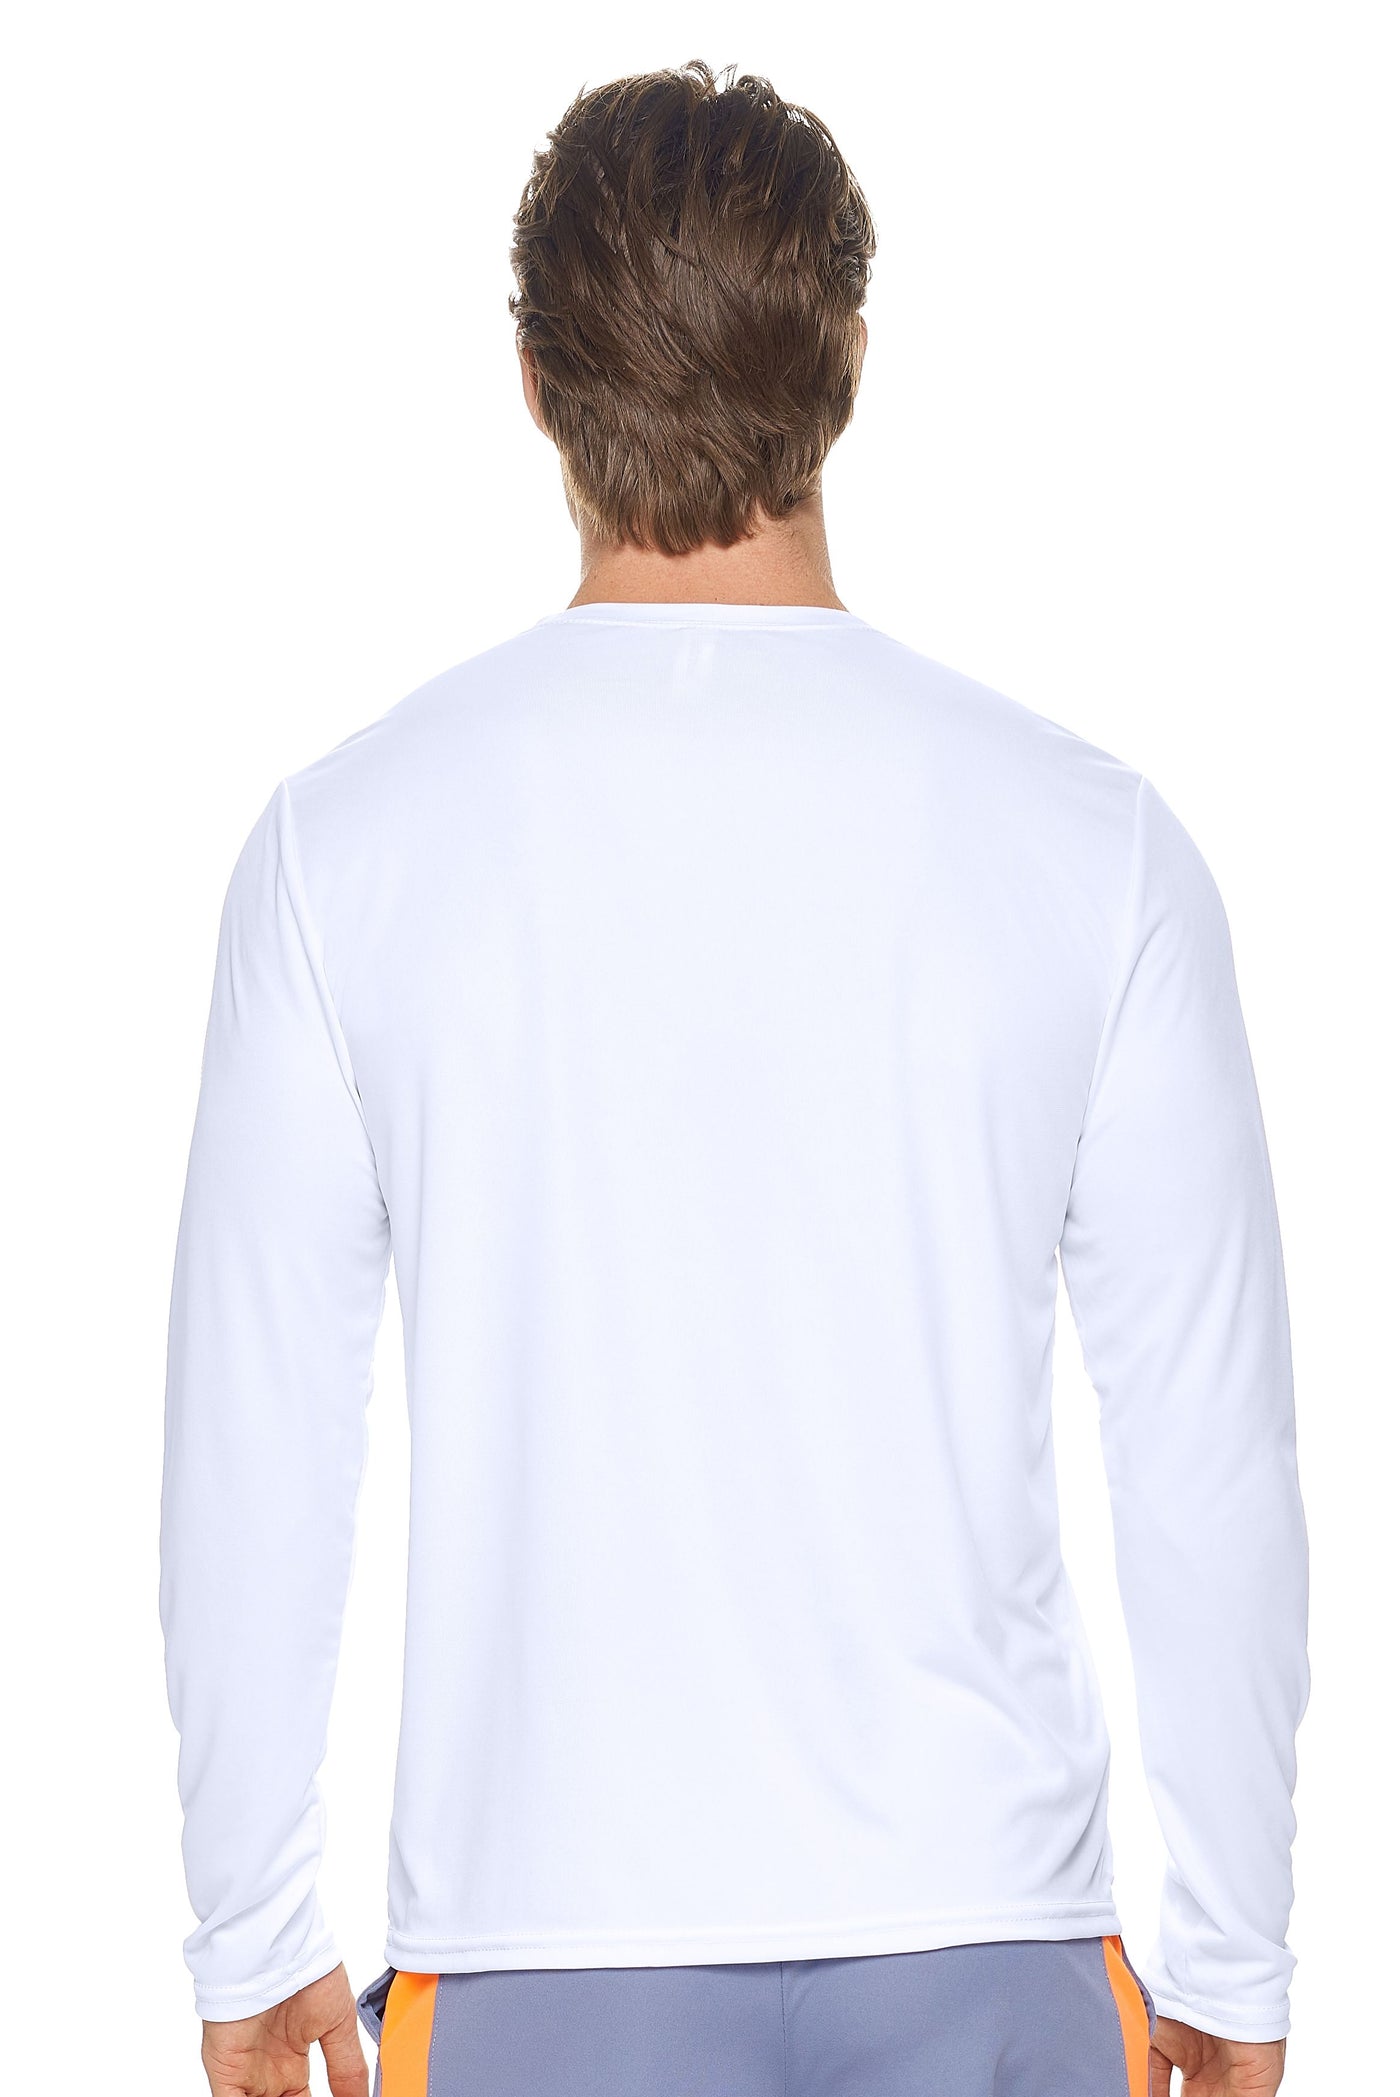 DriMax™ Long Sleeve Tec Tee 🇺🇸 - Expert Brand Apparel#color_white